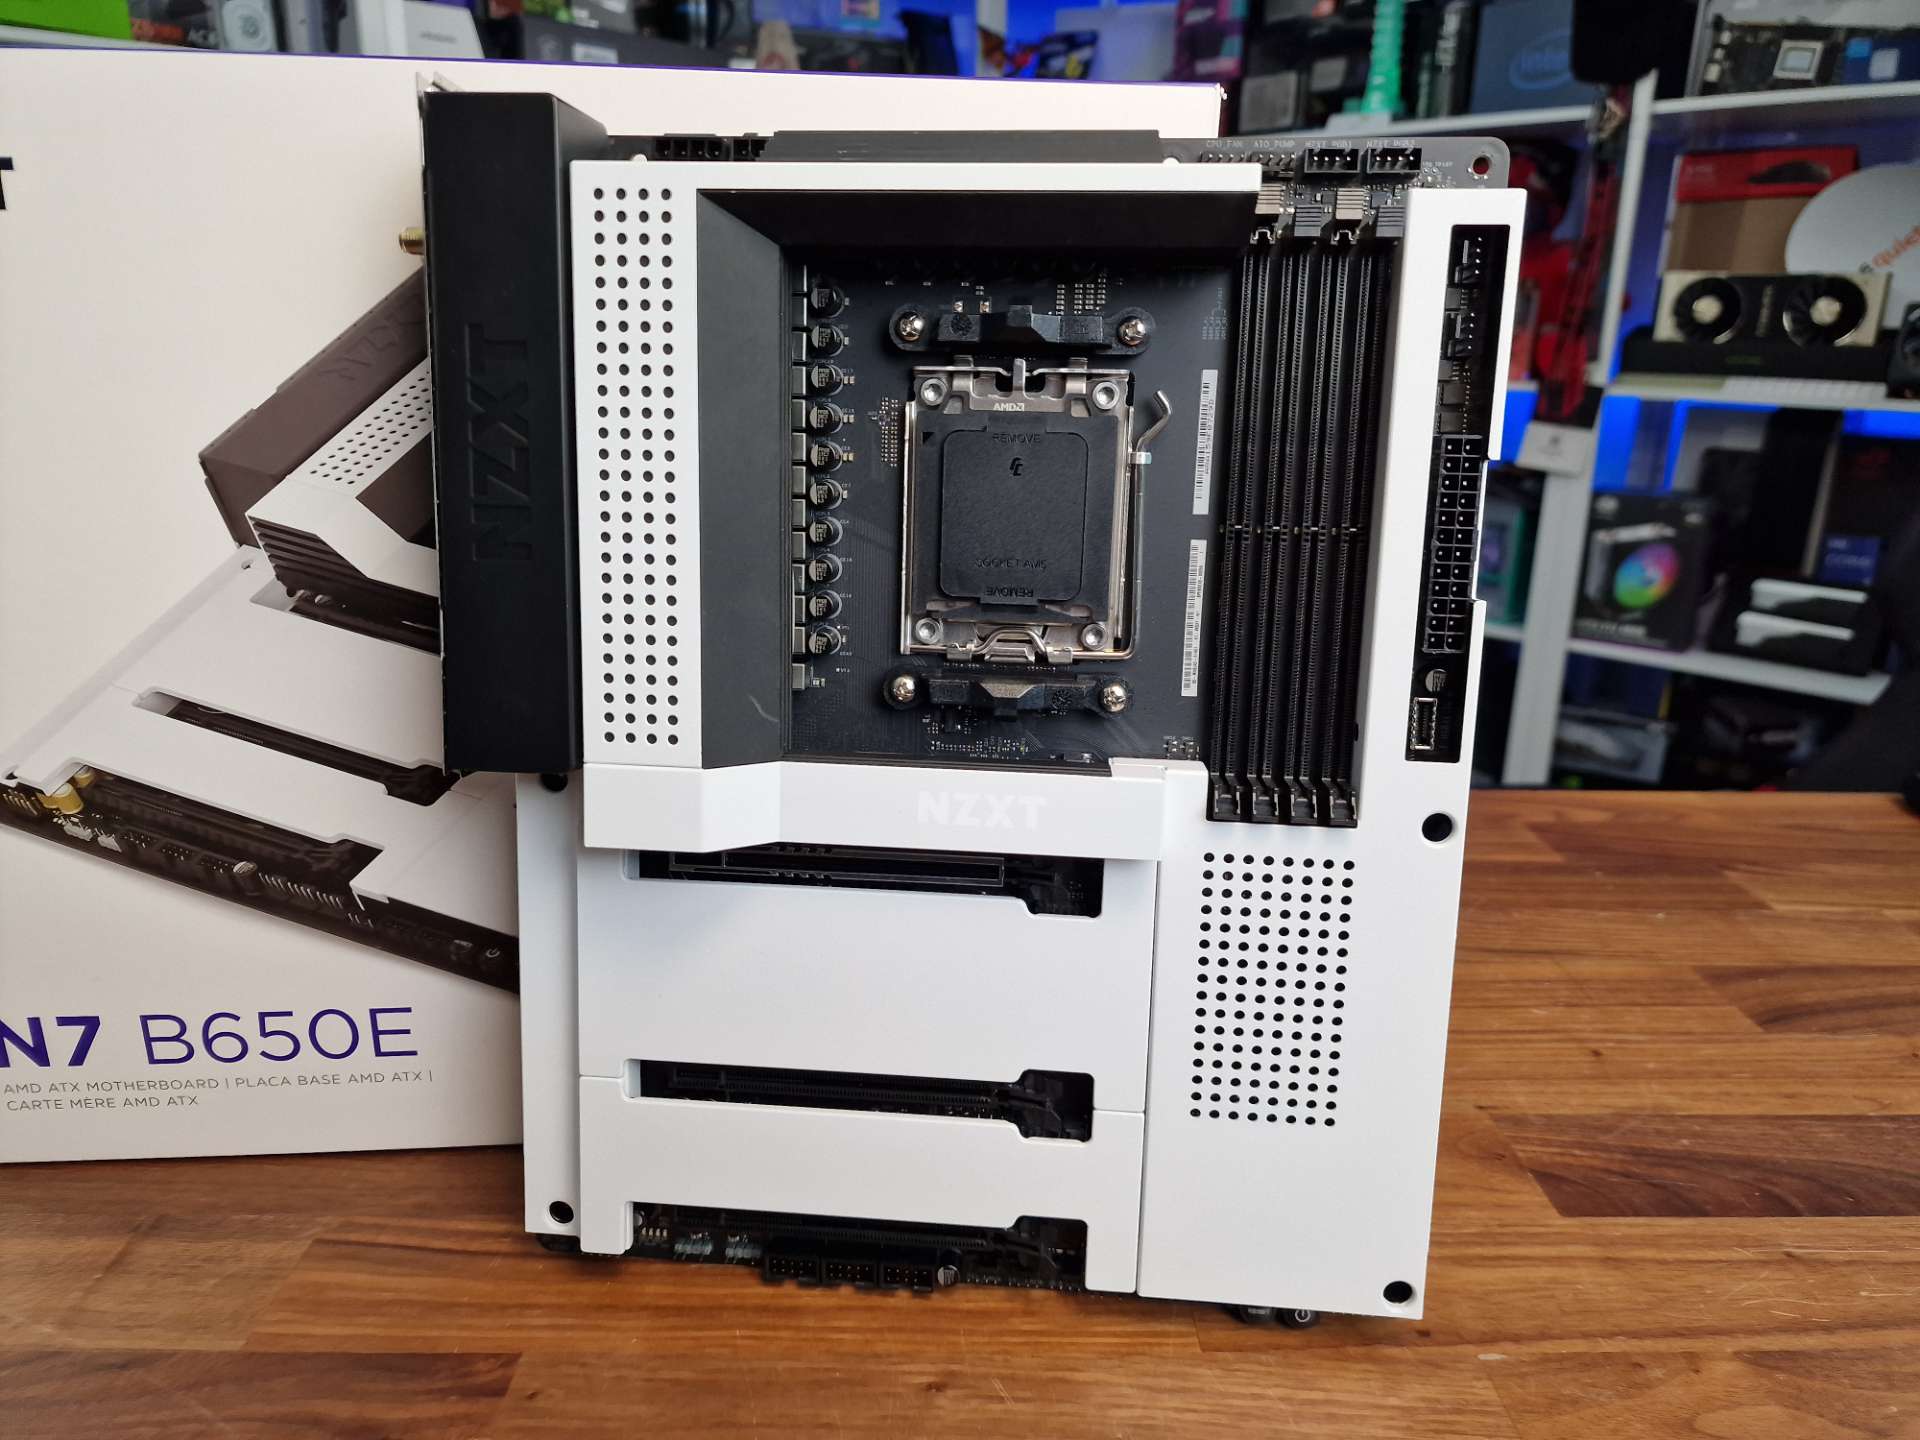 NZXT N7 B650E Motherboard Review - eTeknix